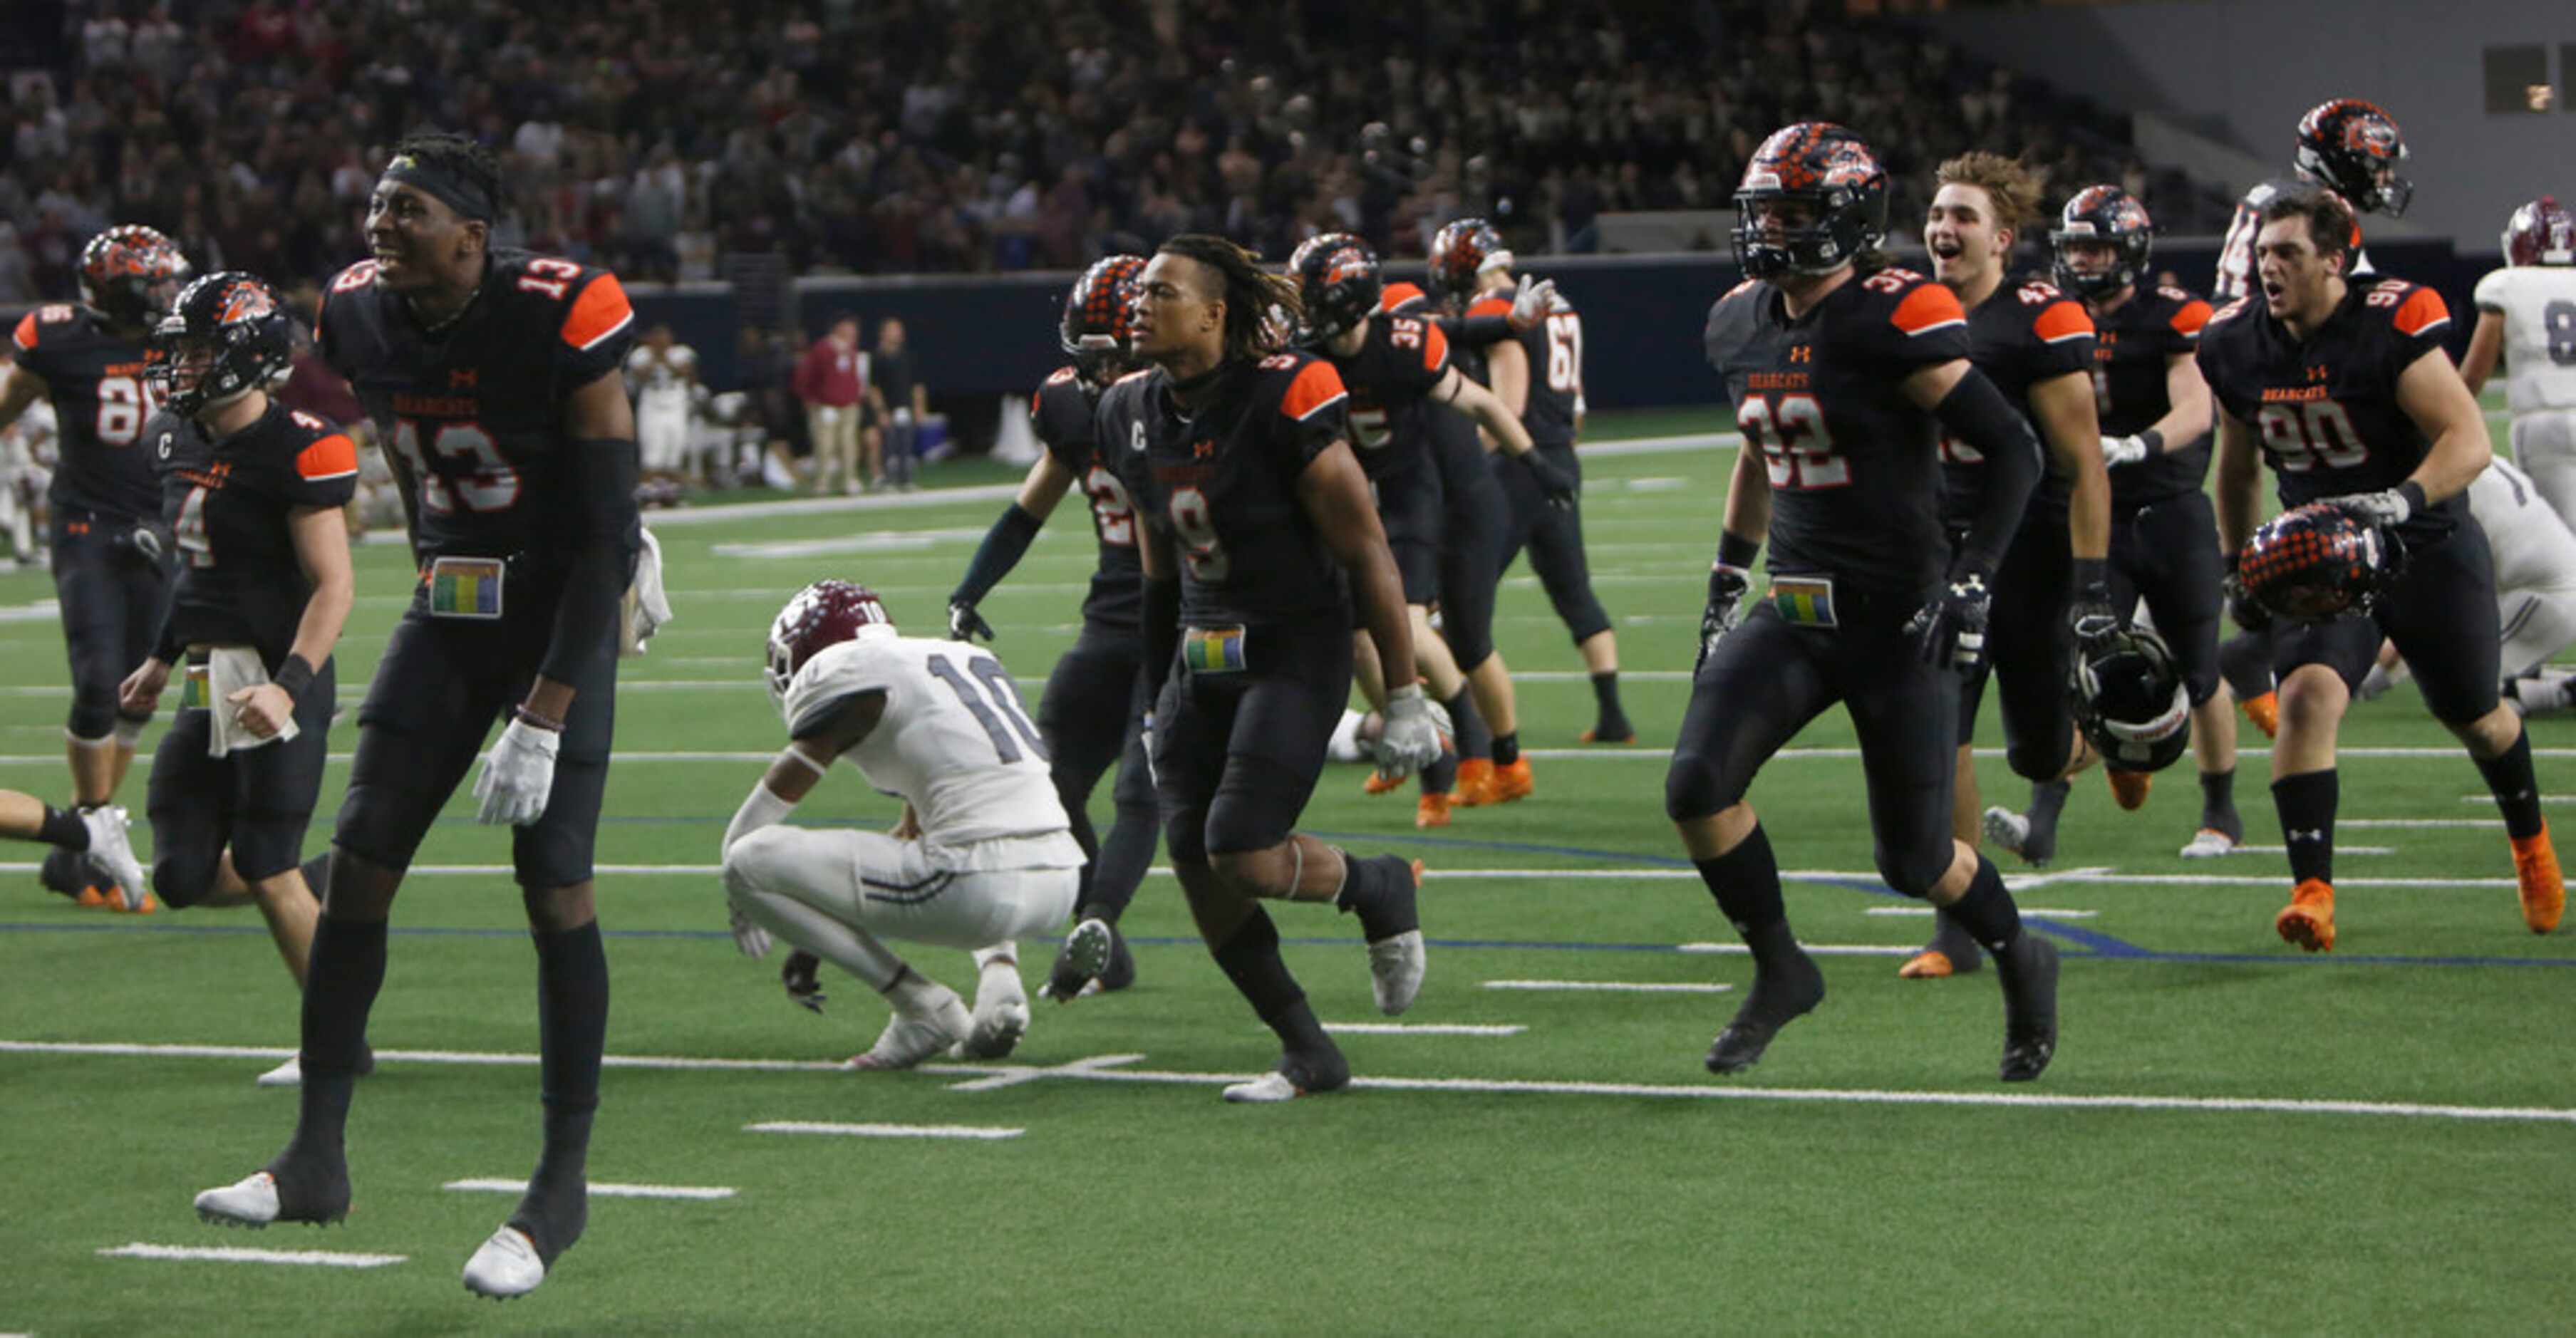 Aledo Bearcats players storm the field as Ennis Lions players including Azain Brown (10)...